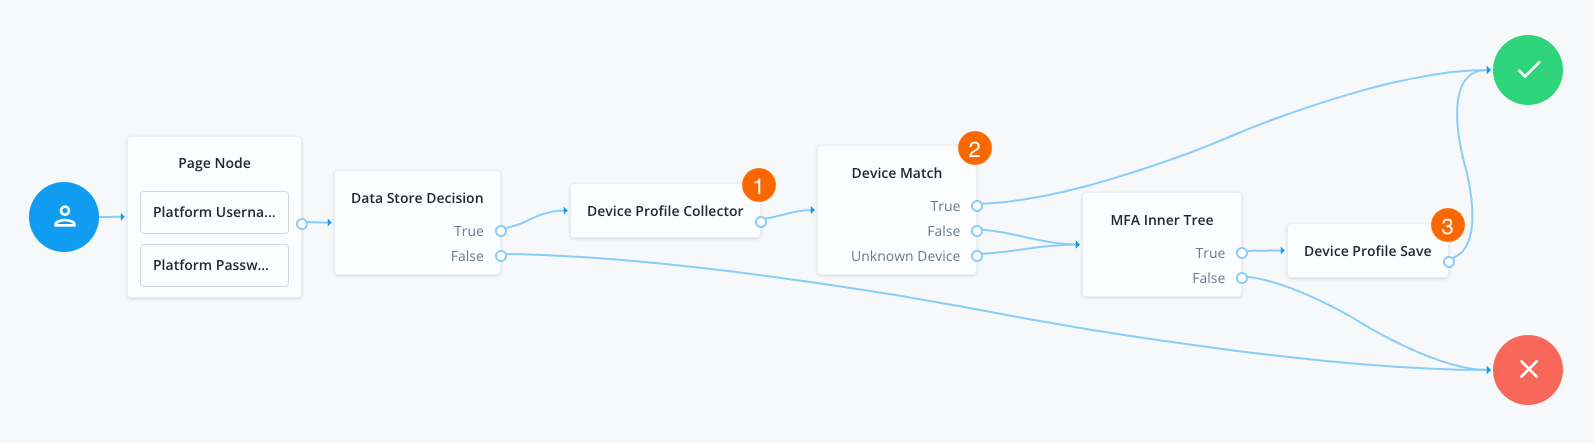 An example device profiling journey